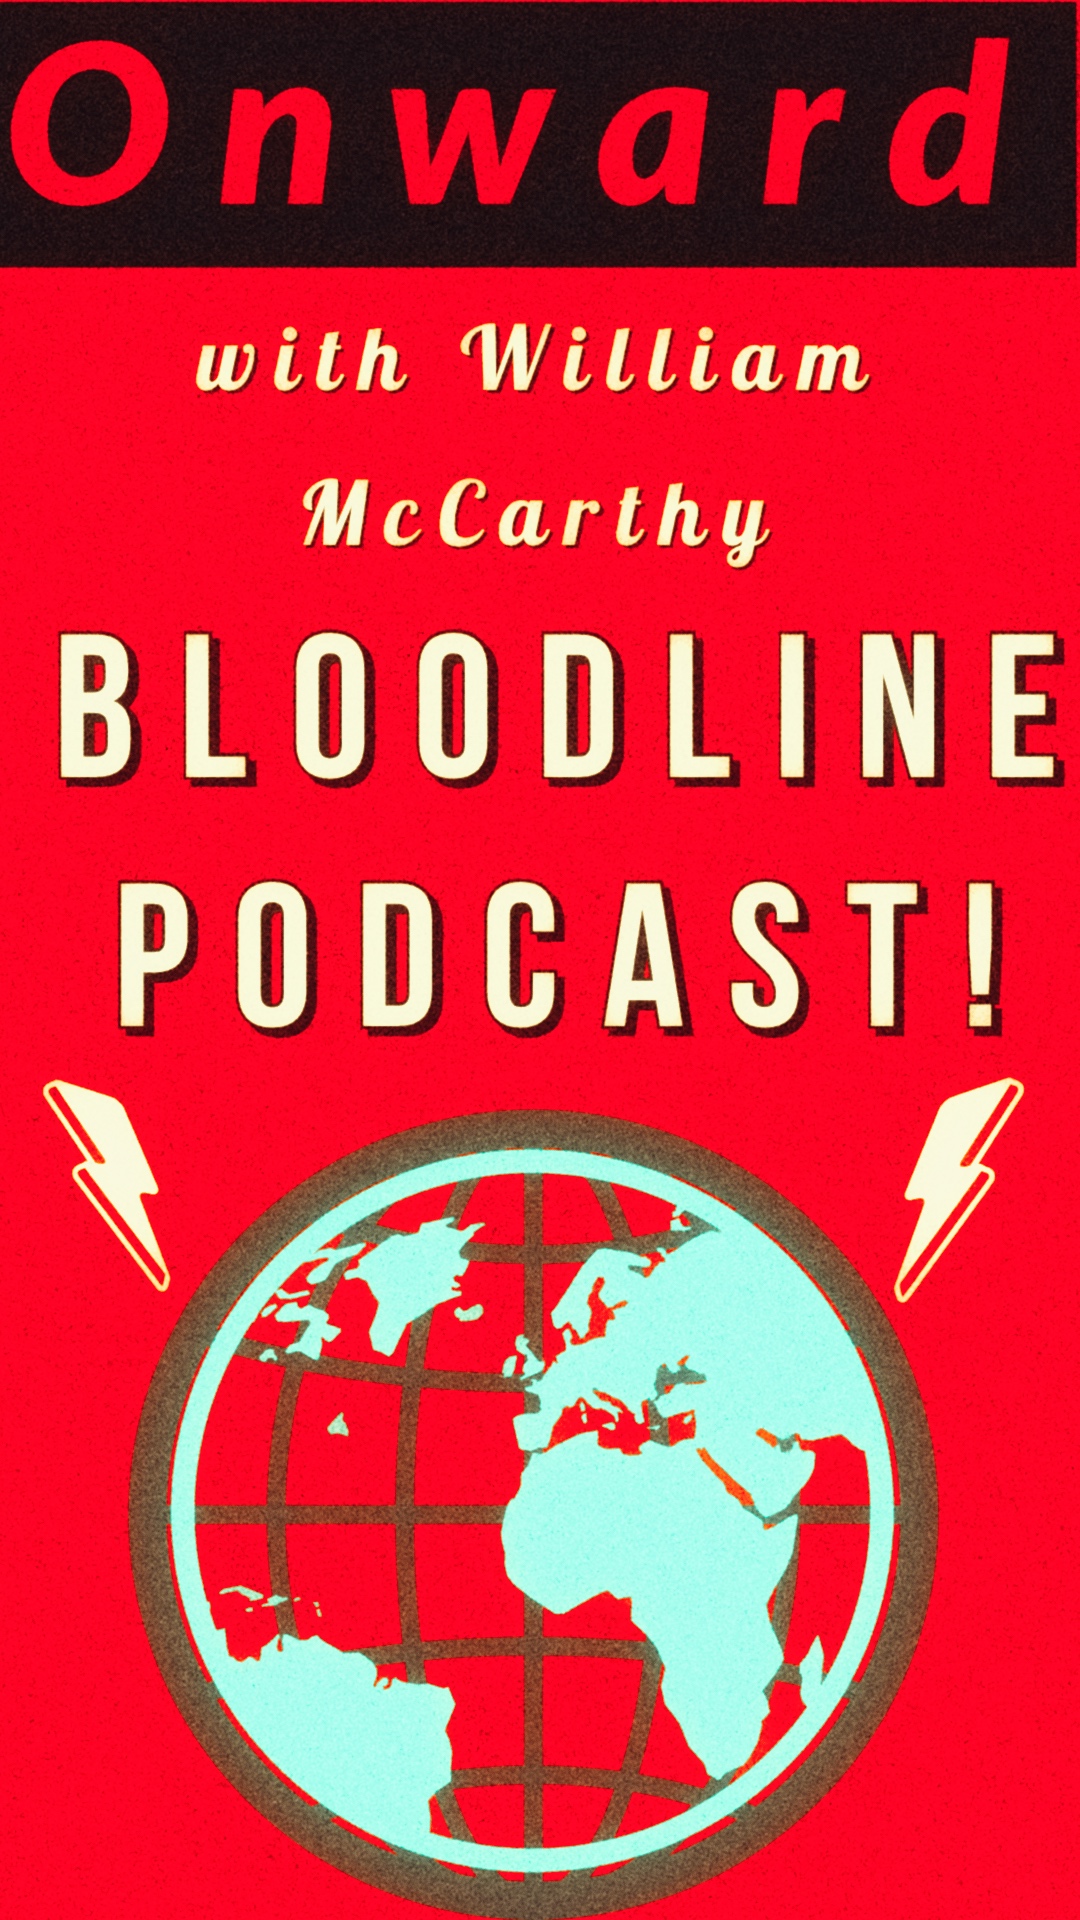 The Bloodline Podcast